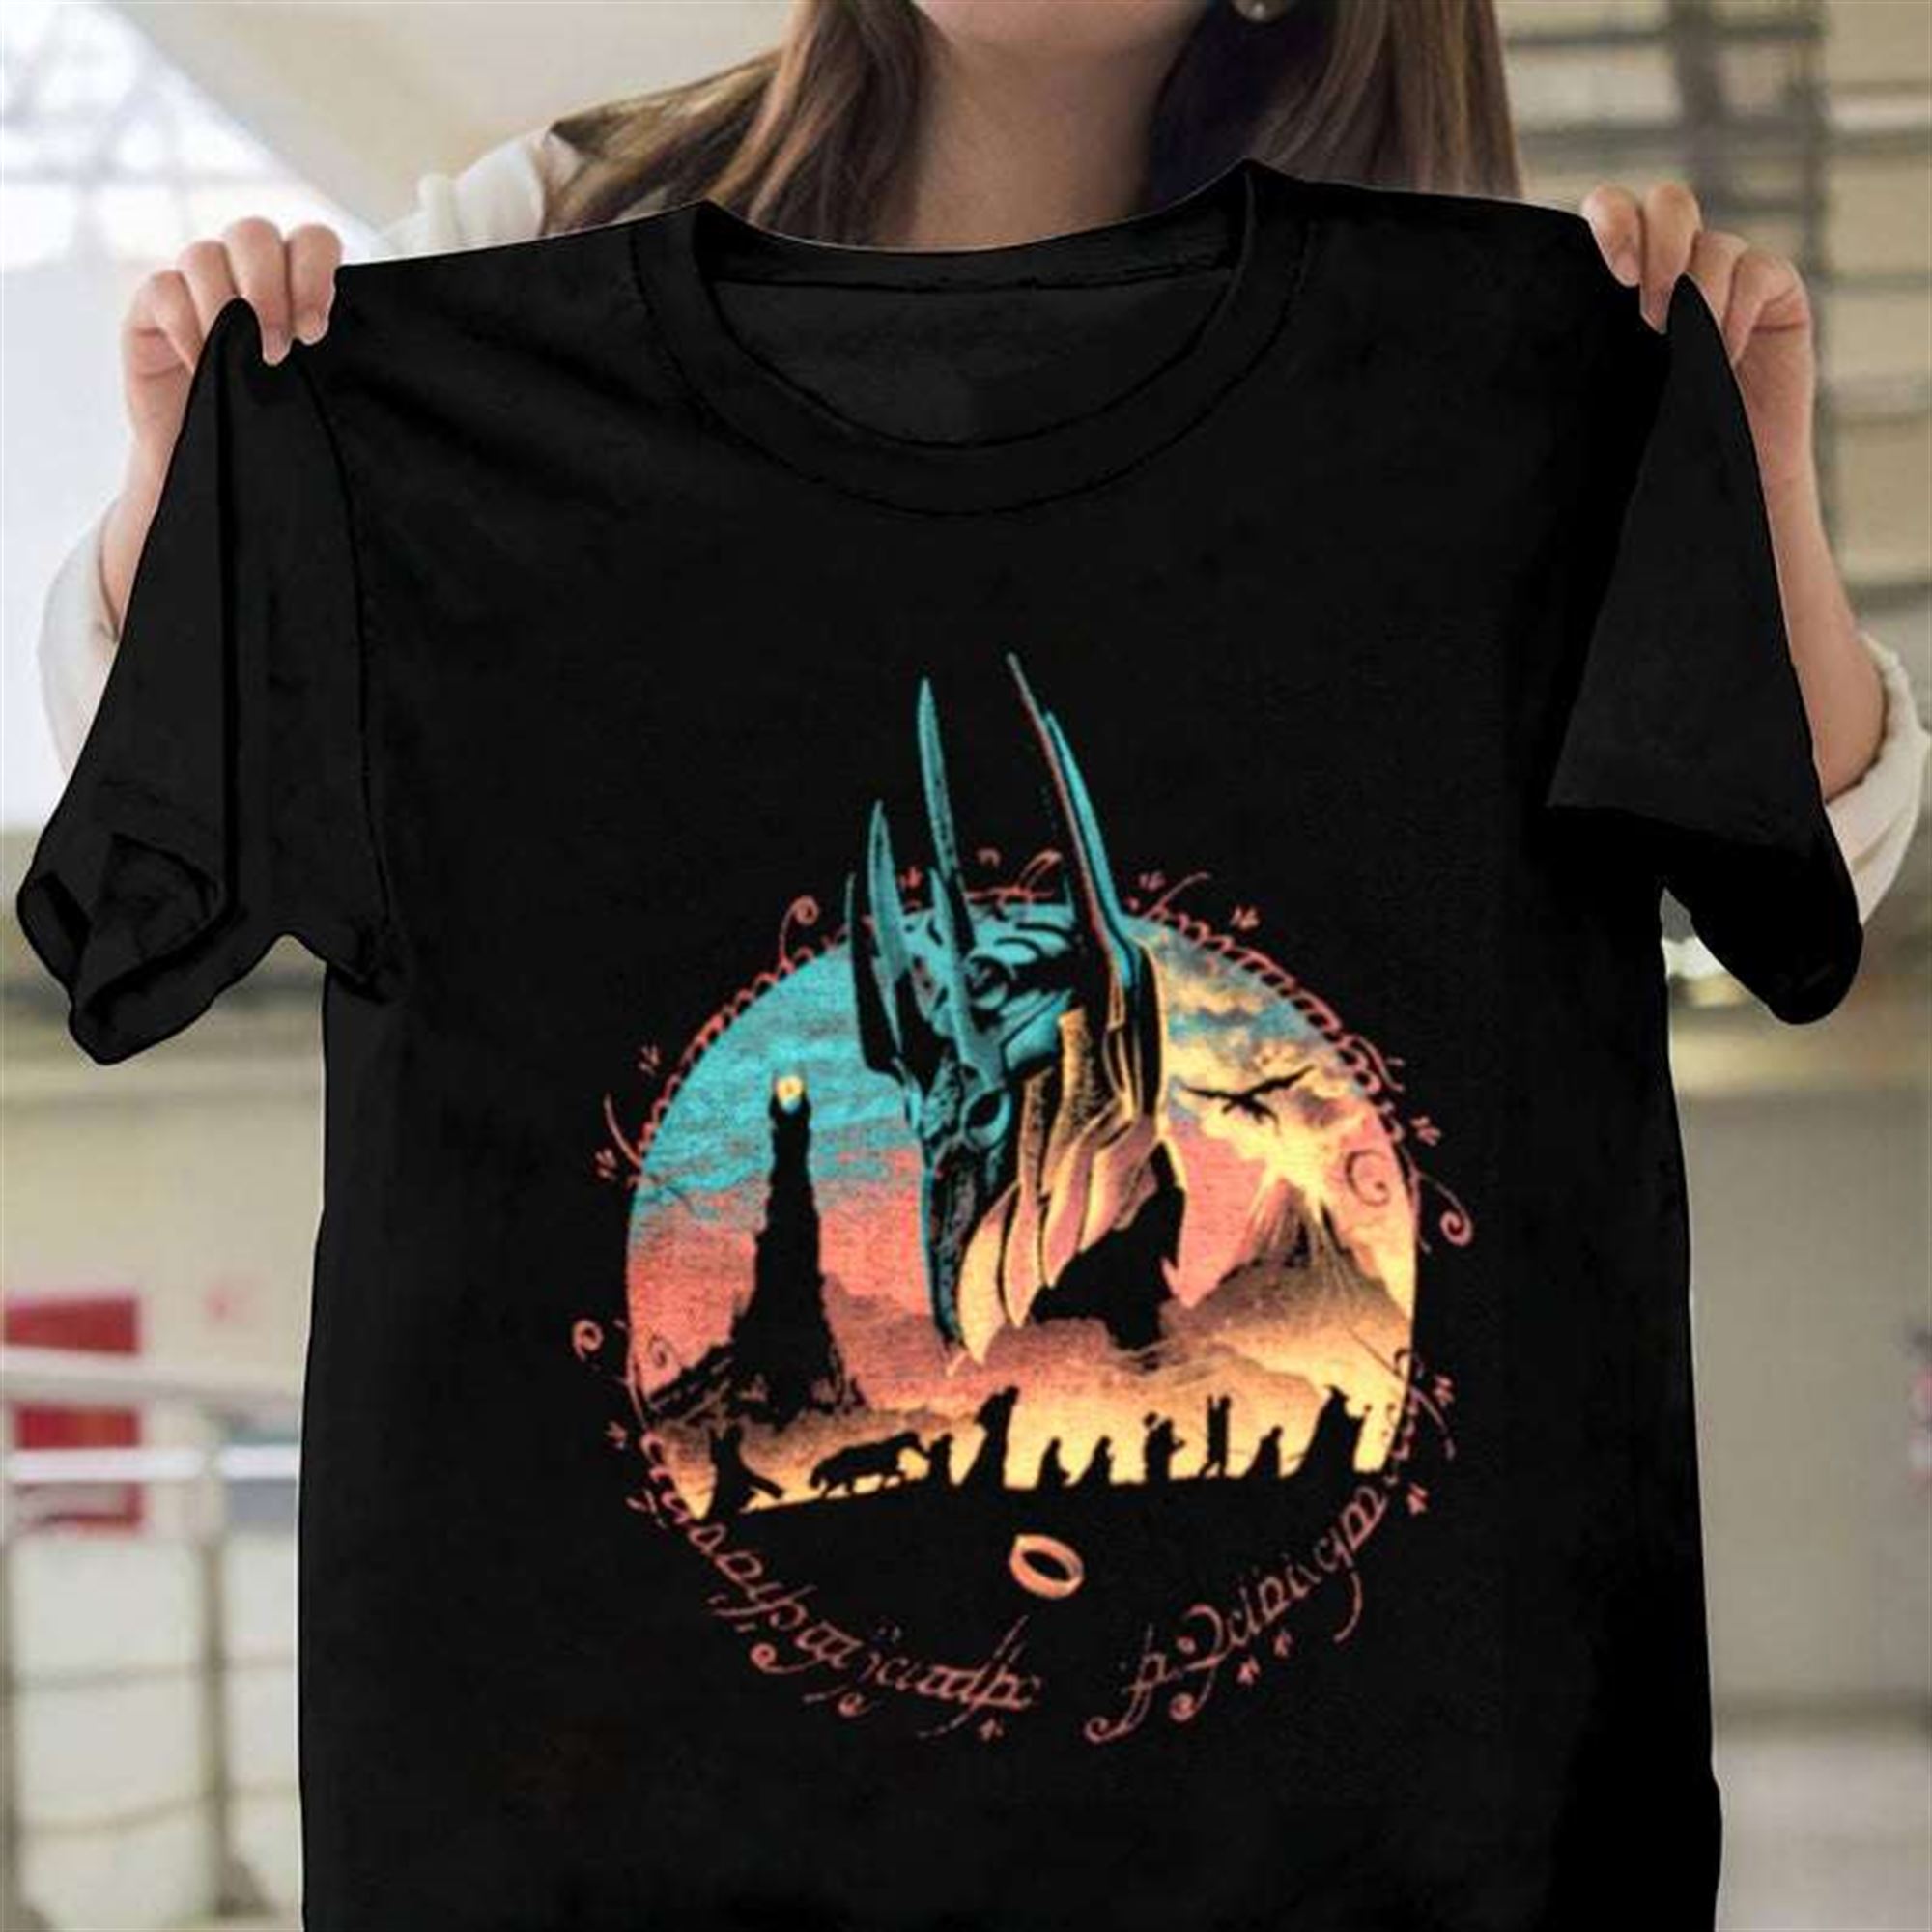 Sauron Lord Of The Rings T-shirt Plus Size Up To 5x